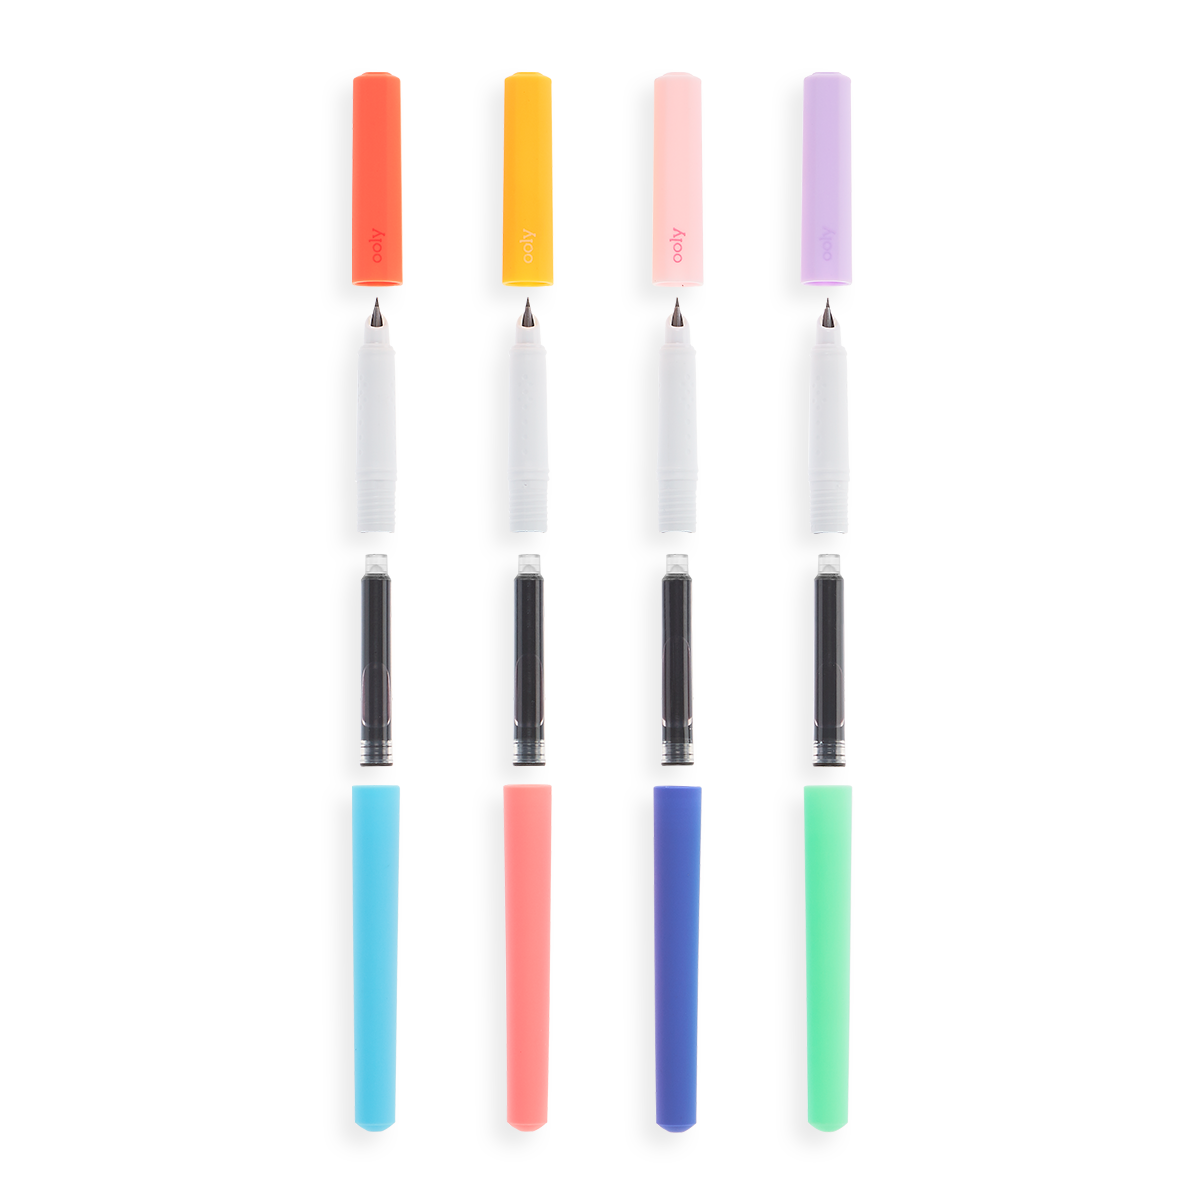 Color Write Fountain Pens (with Colored Ink) - OOLY